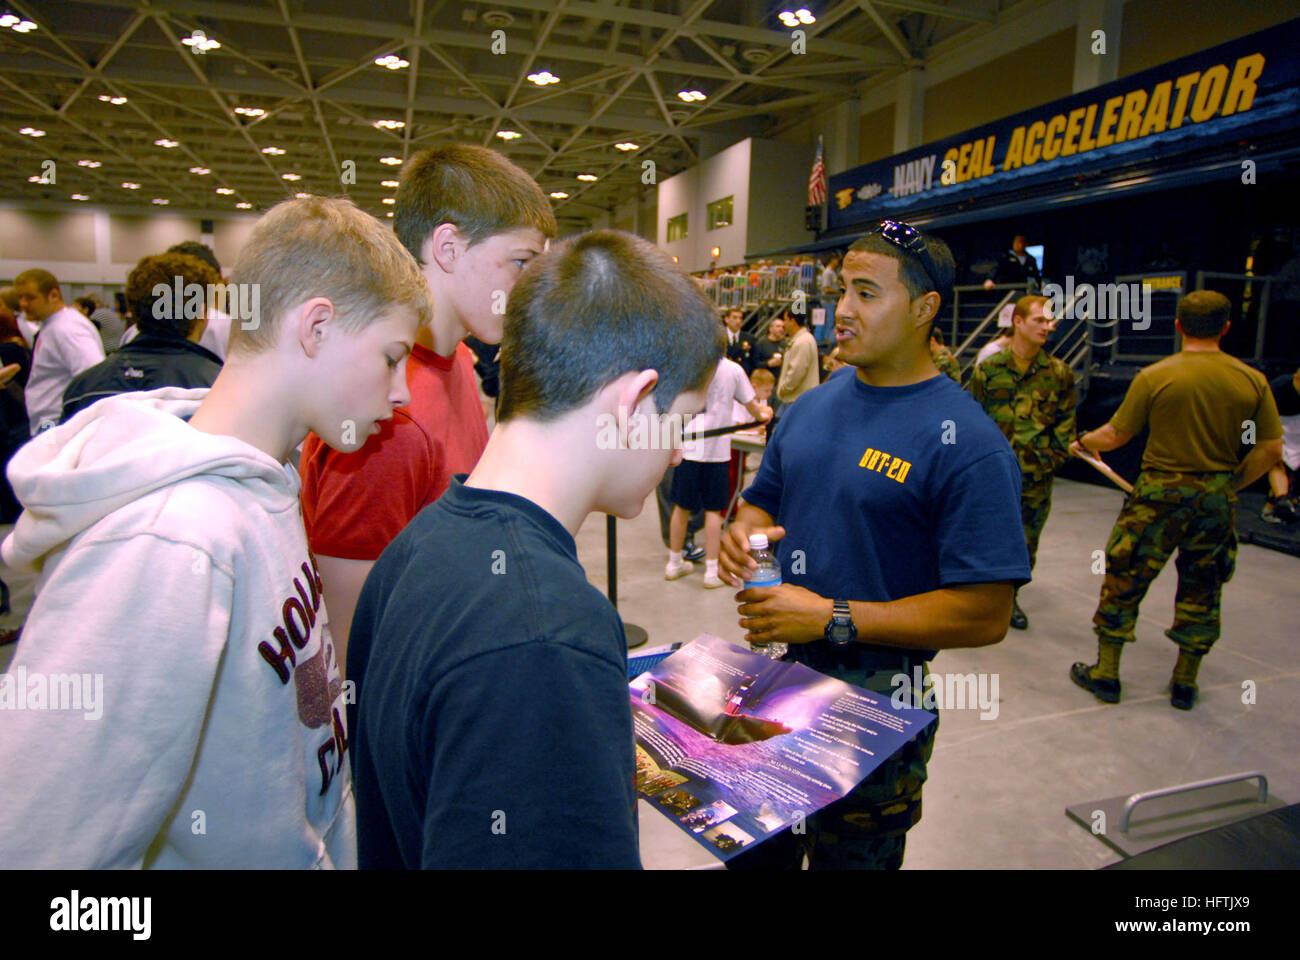 070330-N-4515N-009  VIRGINIA BEACH, Va. (March 30, 2007) - Special Warfare Boat Operator 2nd Class Ronnie Longoria from Special Boat Team 20 talks with high school students attending the National High School Wrestling Championship at the Virginia Beach Convention Center. Longoria volunteered to work with the Navy SEAL Accelerator, which travels the country introducing careers that are available in the Navy special warfare community. U.S. Navy photo by Mass Communication Specialist Seaman Apprentice Joshua Adam Nuzzo (RELEASED) US Navy 070330-N-4515N-009 Special Warfare Boat Operator 2nd Class  Stock Photo